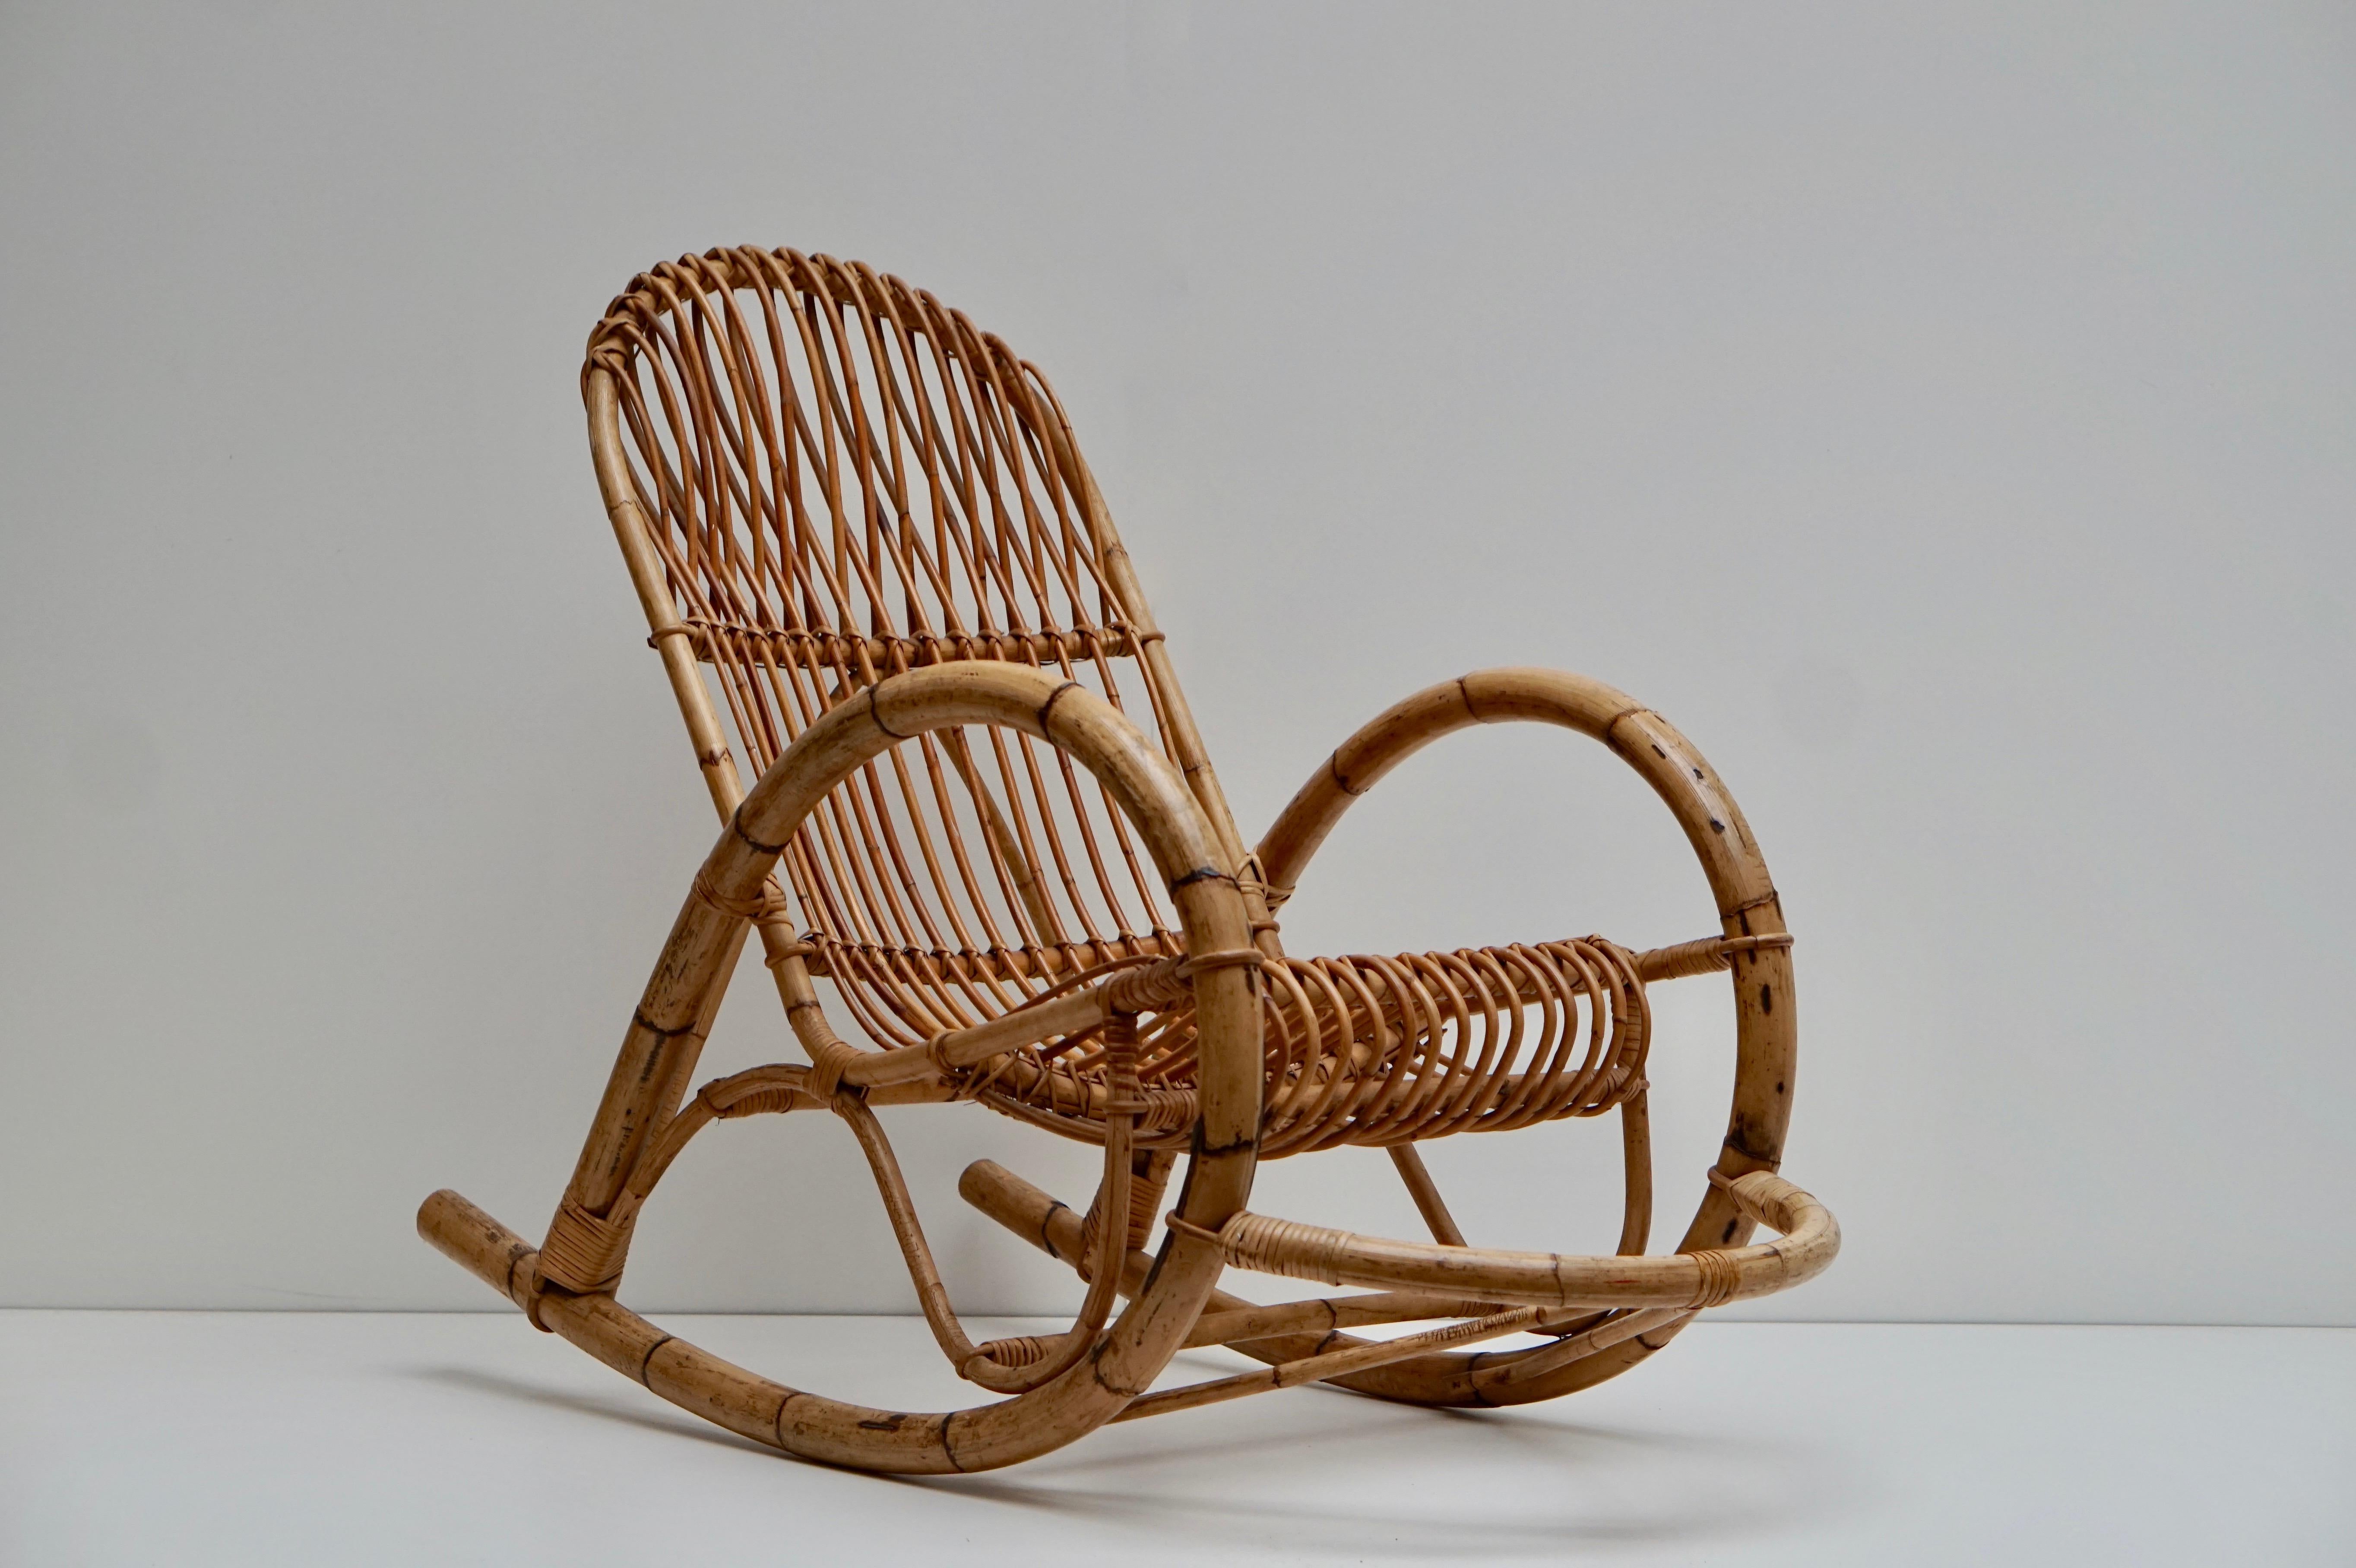 A rare Franco Albini style arm rattan rocking chair. This chair features a steam bent bamboo frame.
This rare rocking chair was made in the late 1950s-1970s.